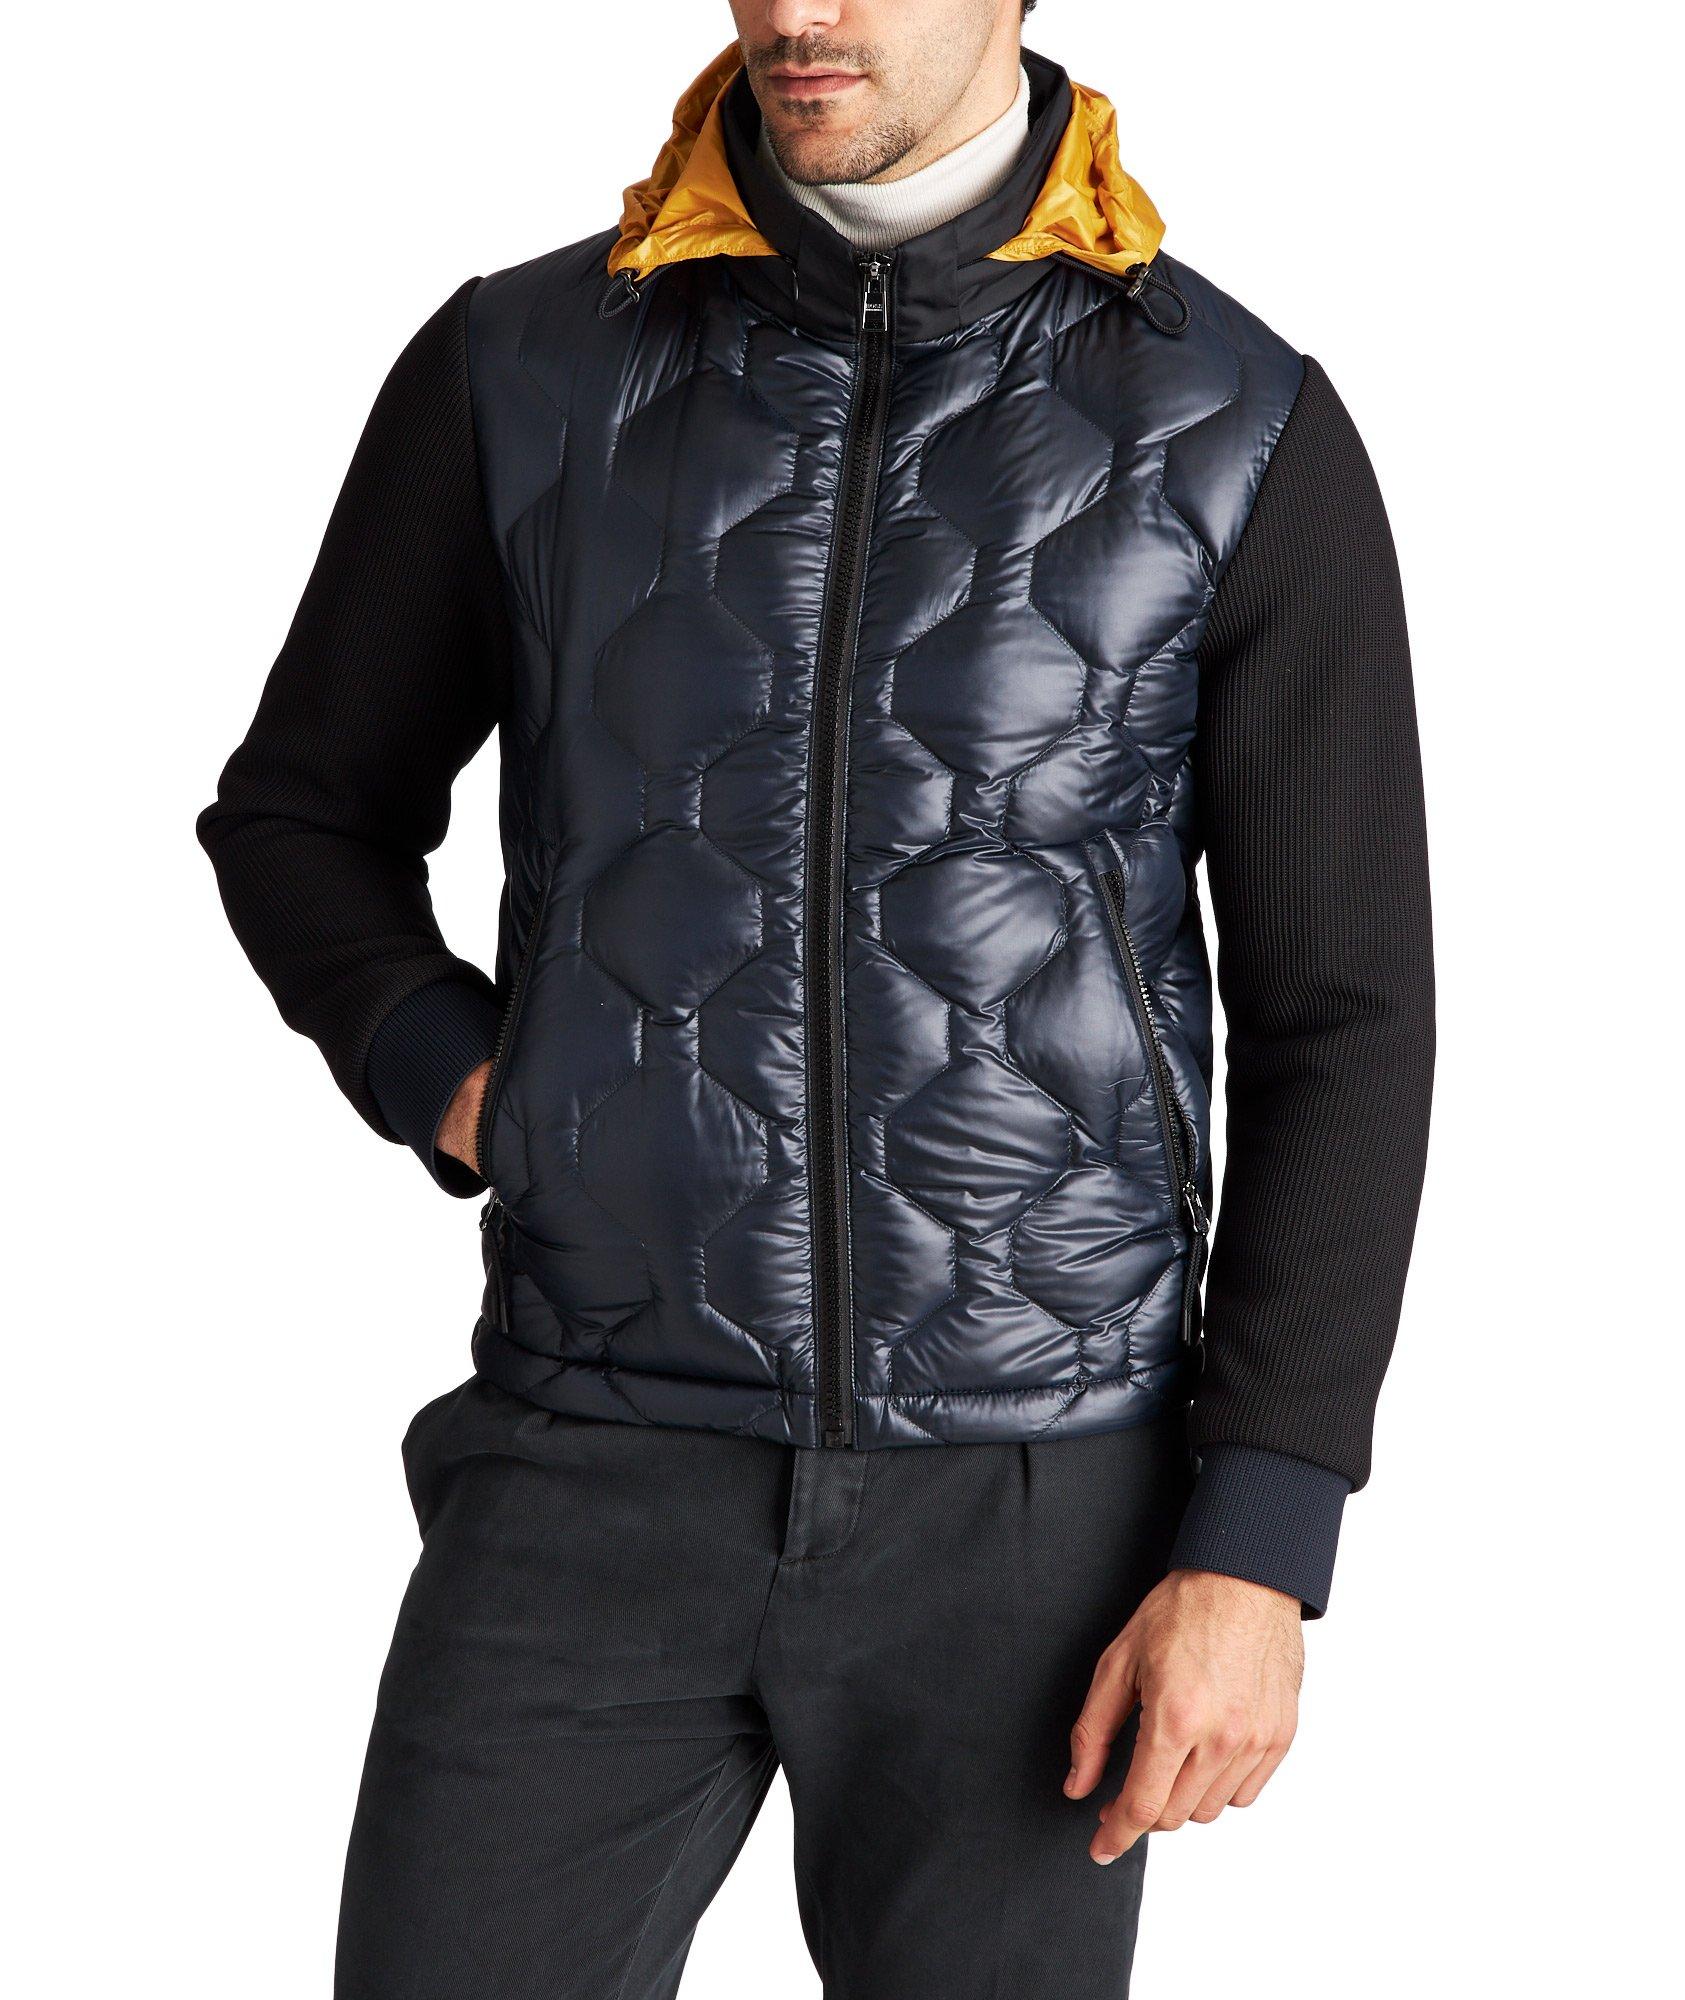 Quilted Down Jacket image 0